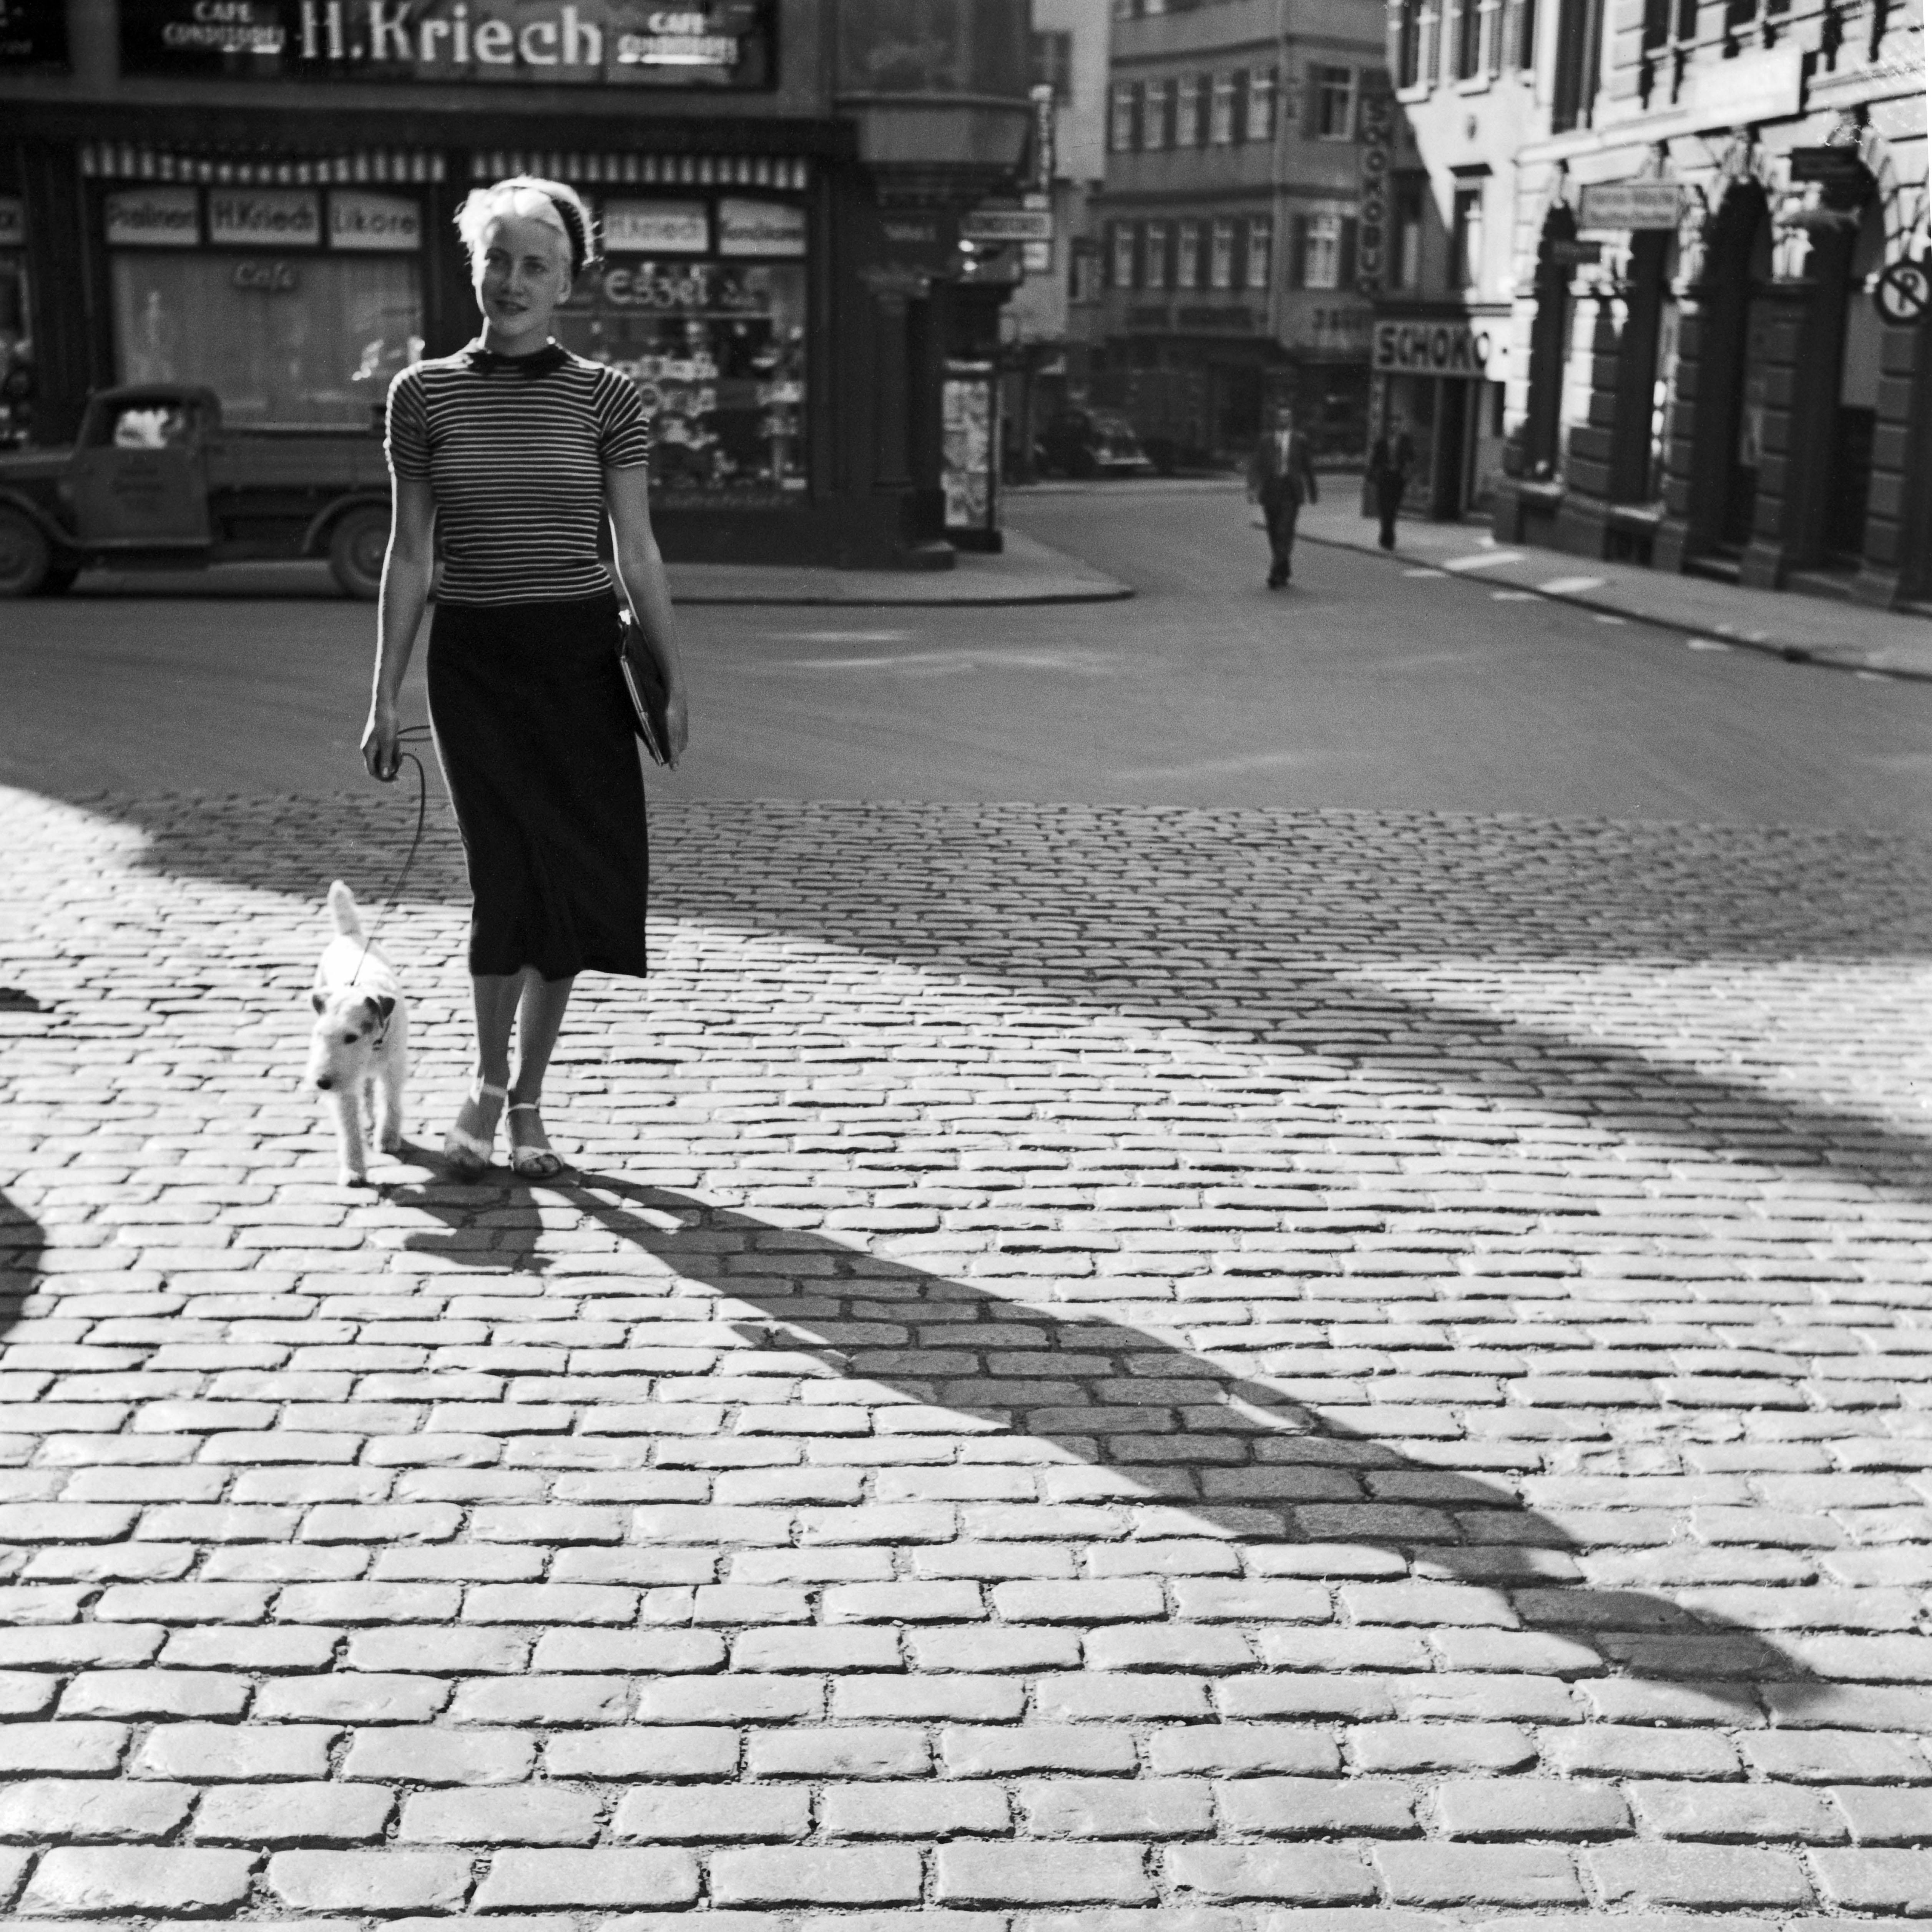 Karl Heinrich Lämmel Black and White Photograph - Lady walking the dog at Cafe Kriech, Stuttgart Germany 1935, Printed Later